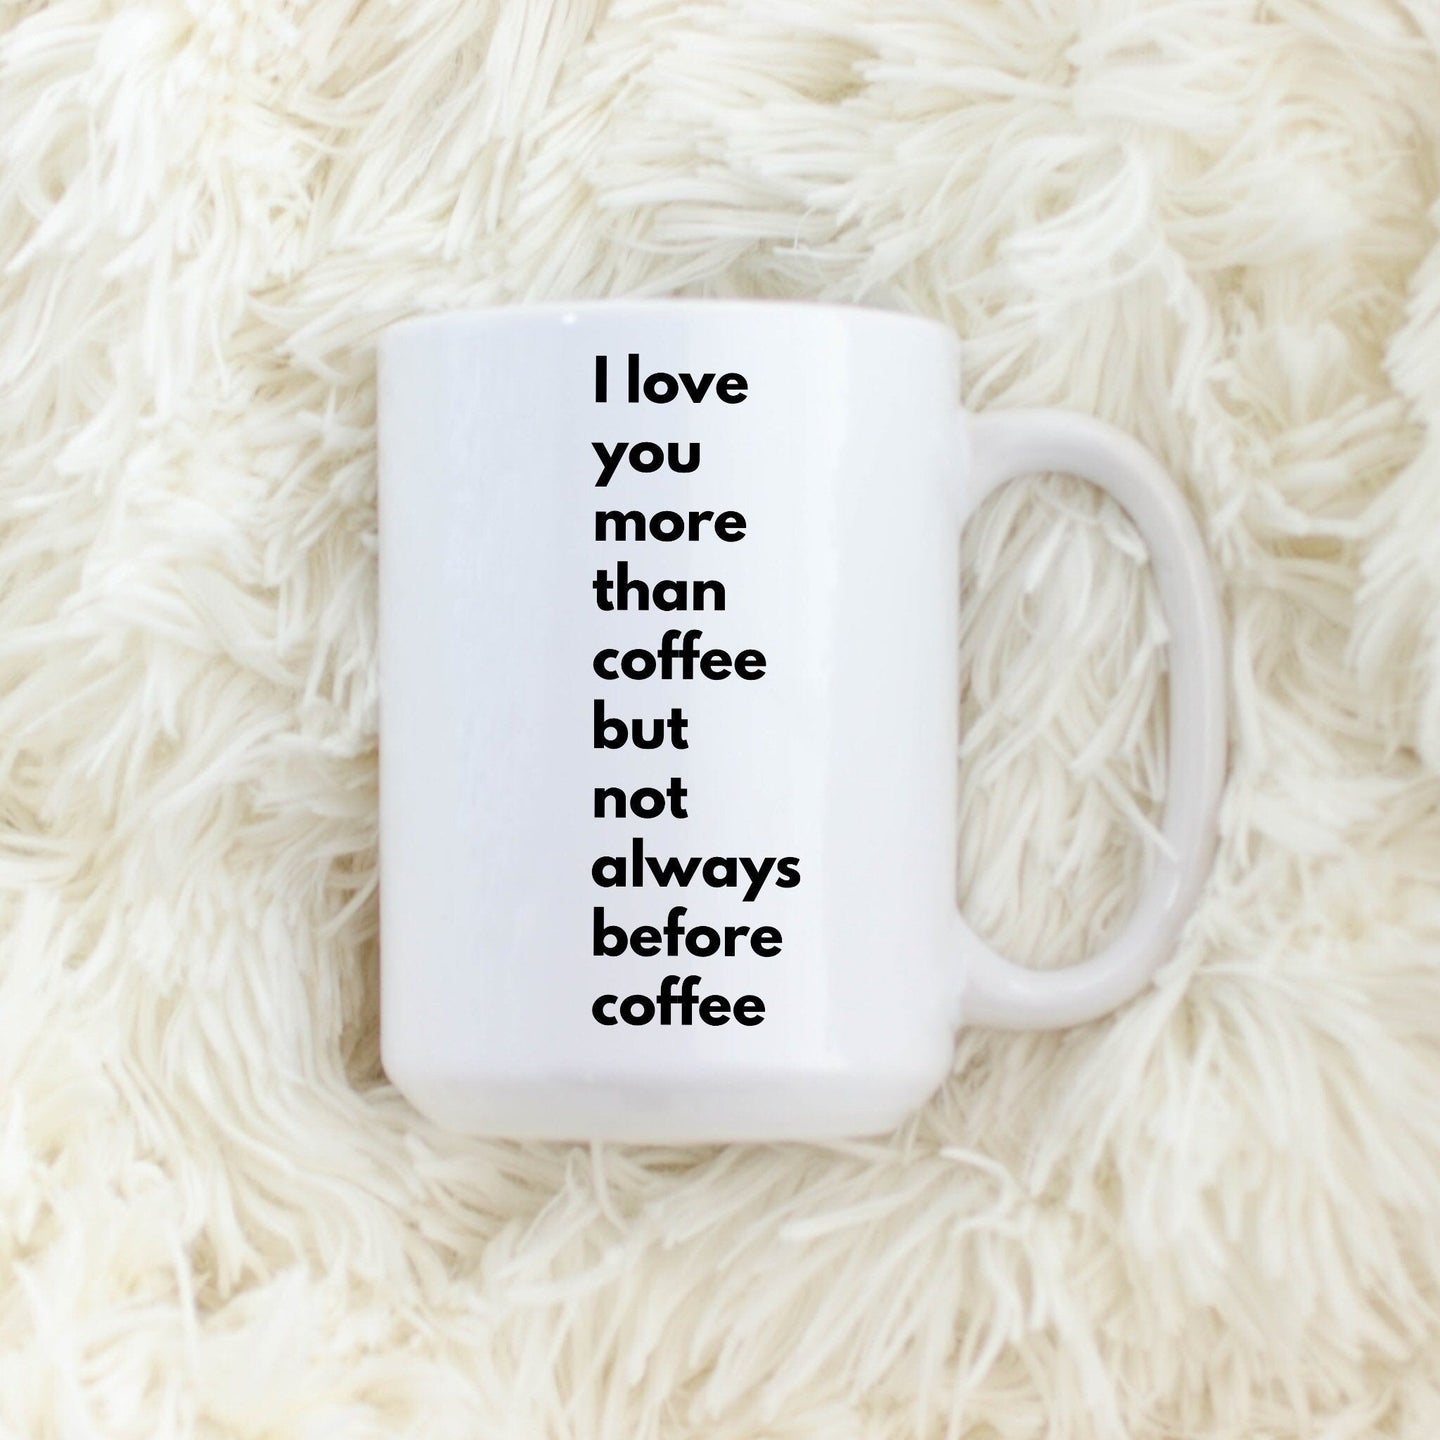 I love you more than coffee but not always before coffee